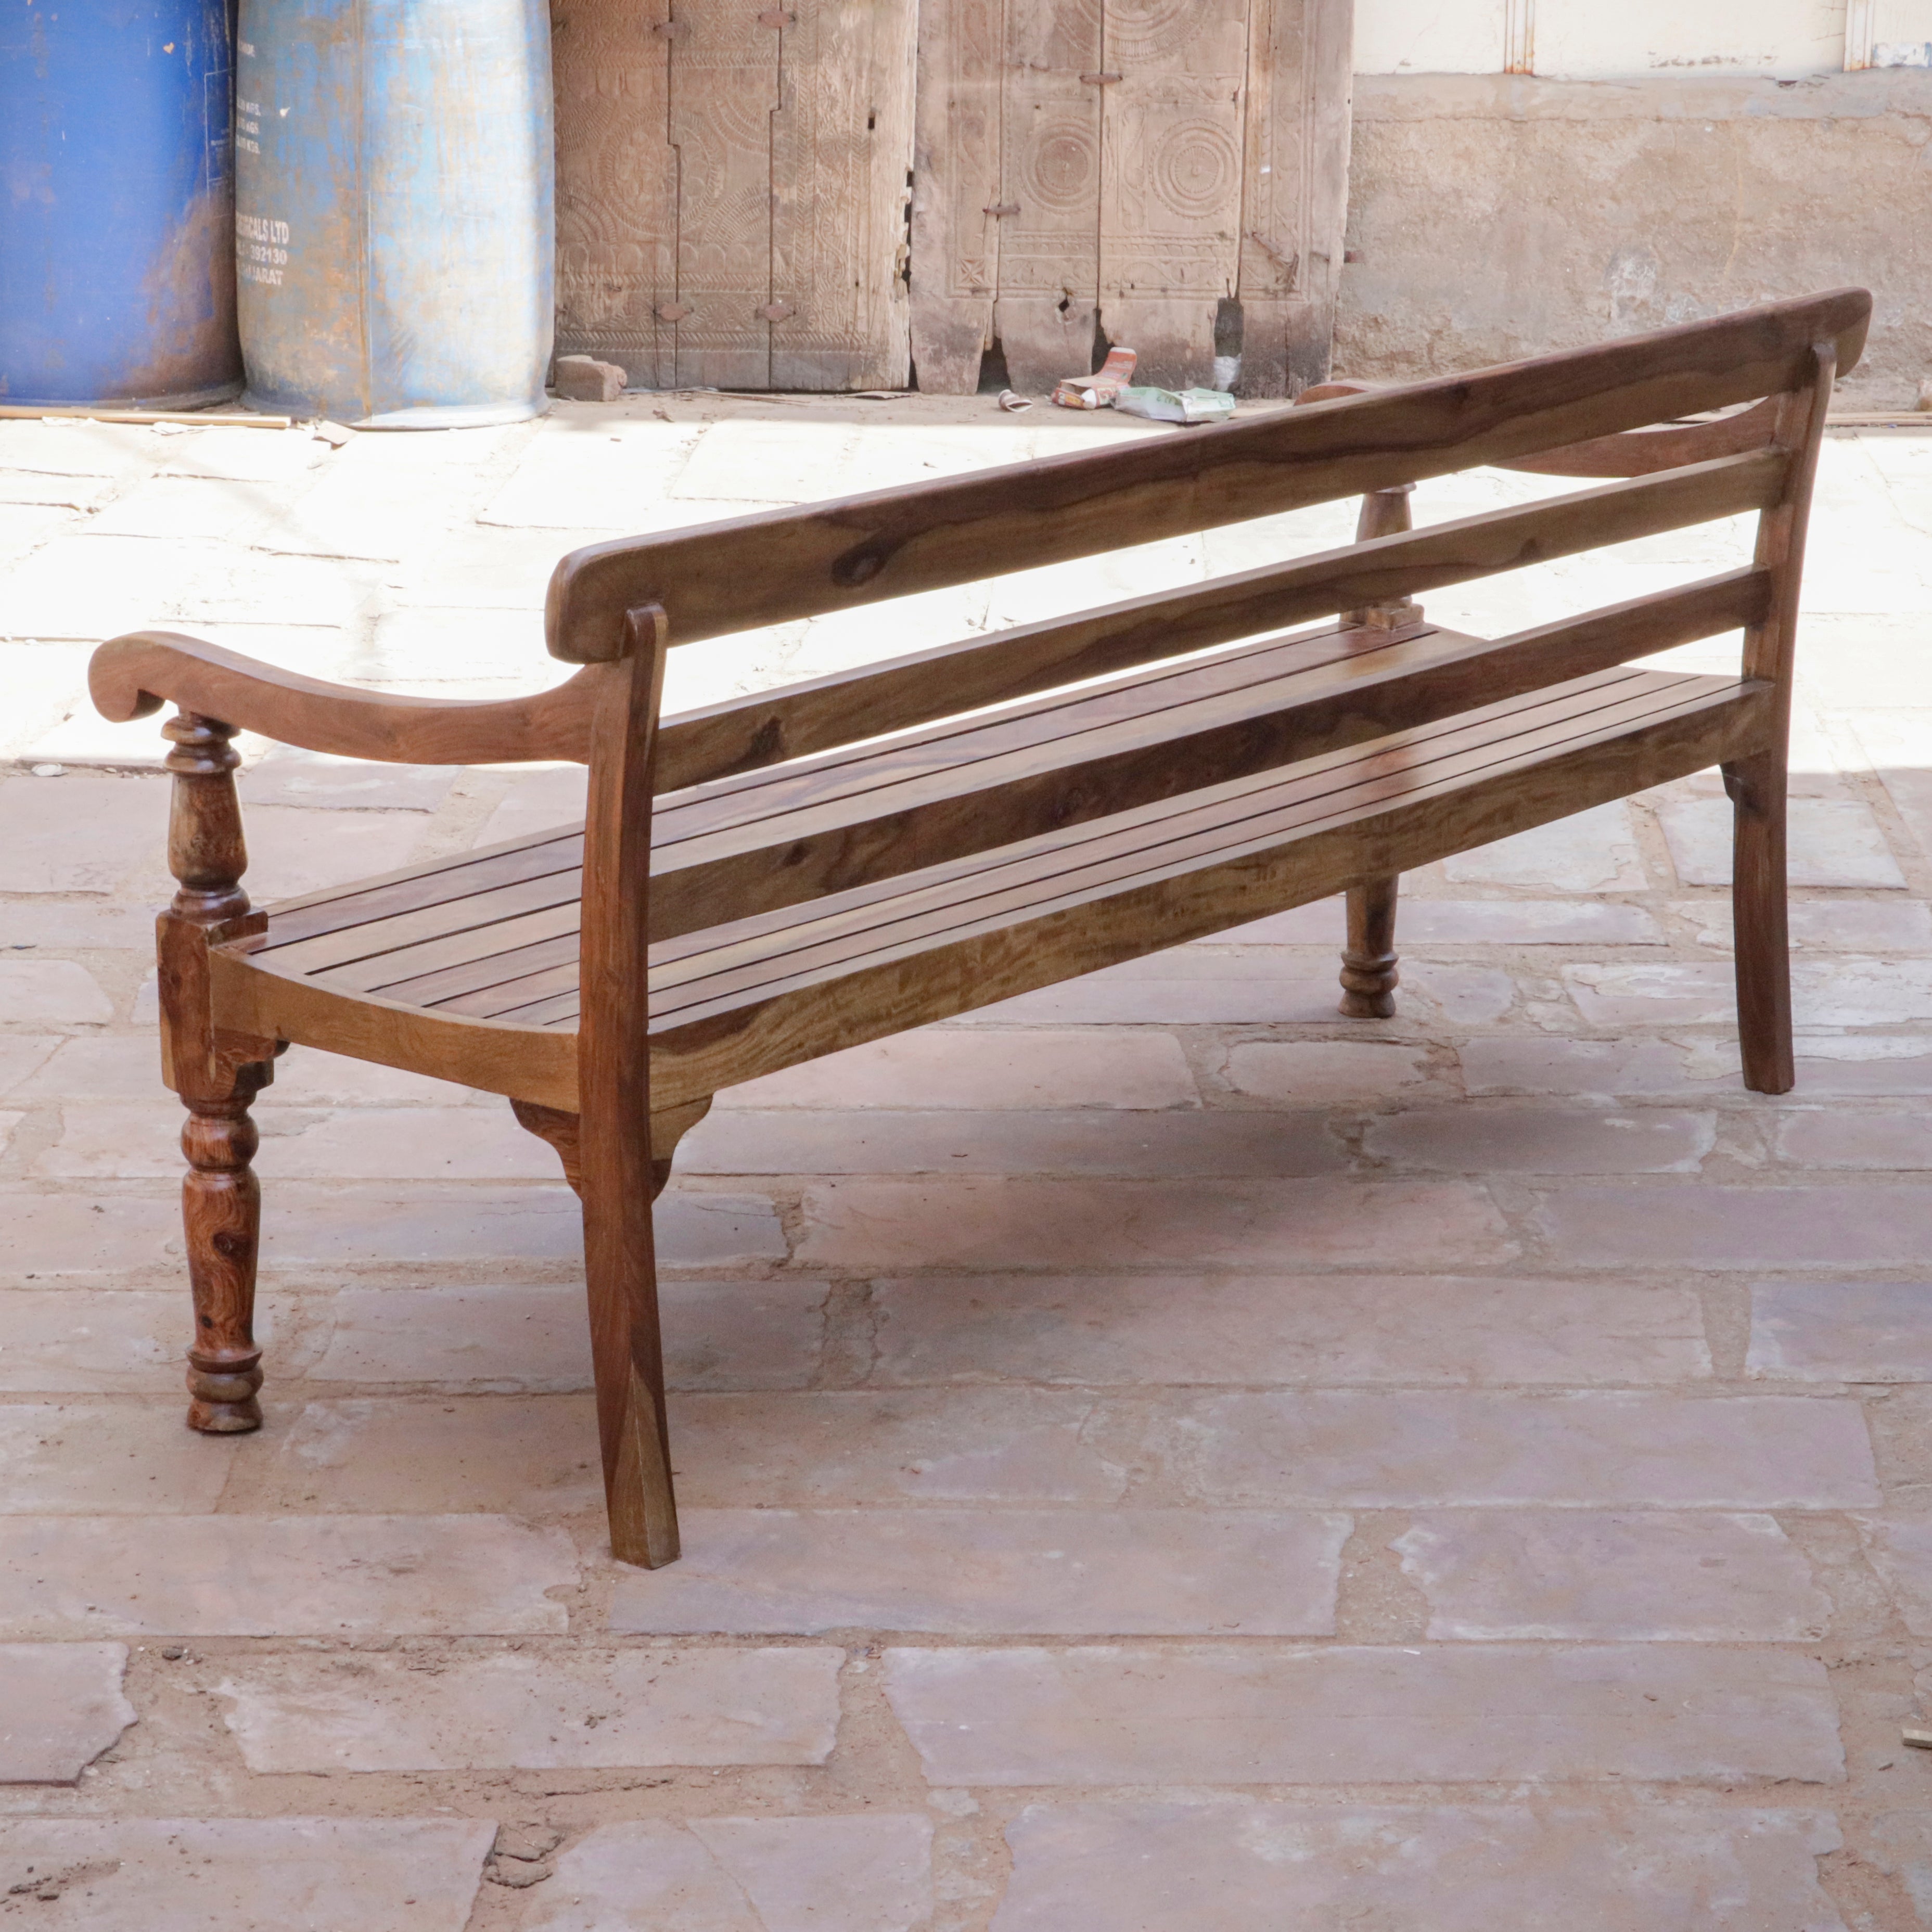 Antique Long Teak Finish Handcrafted Wooden Bench for Home Bench